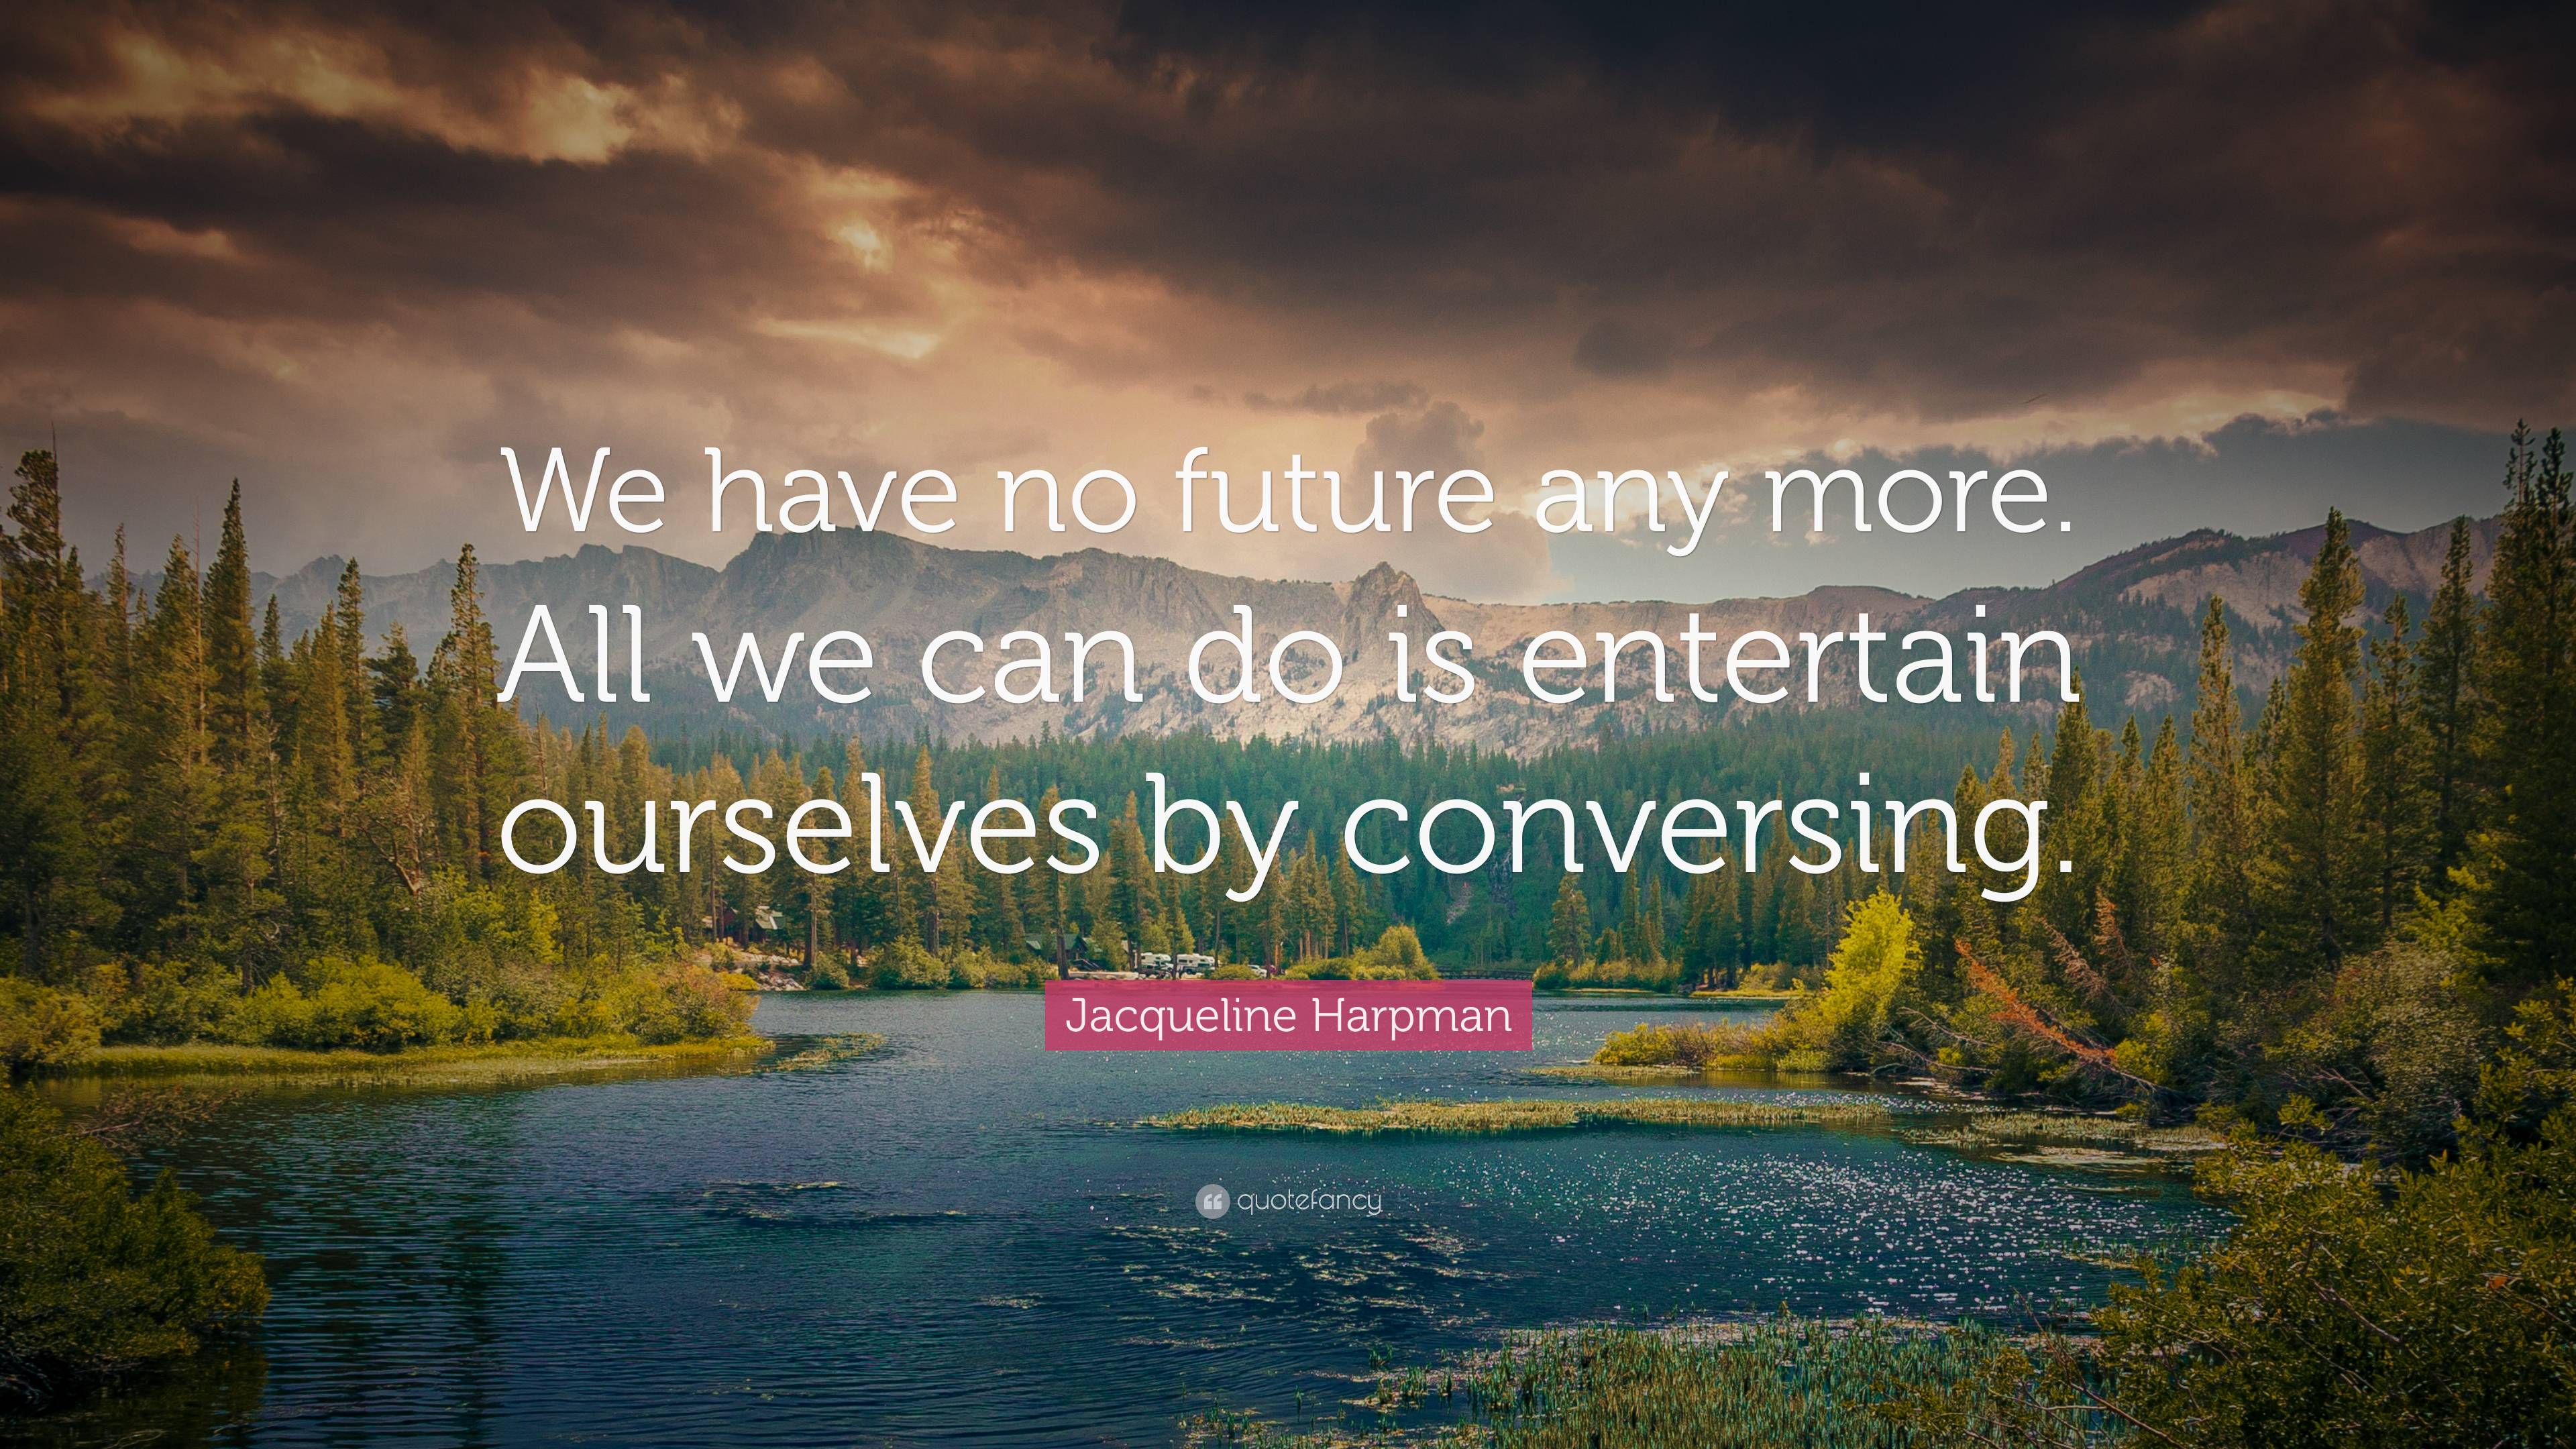 Jacqueline Harpman Quote: “We have no future any more. All we can do is ...